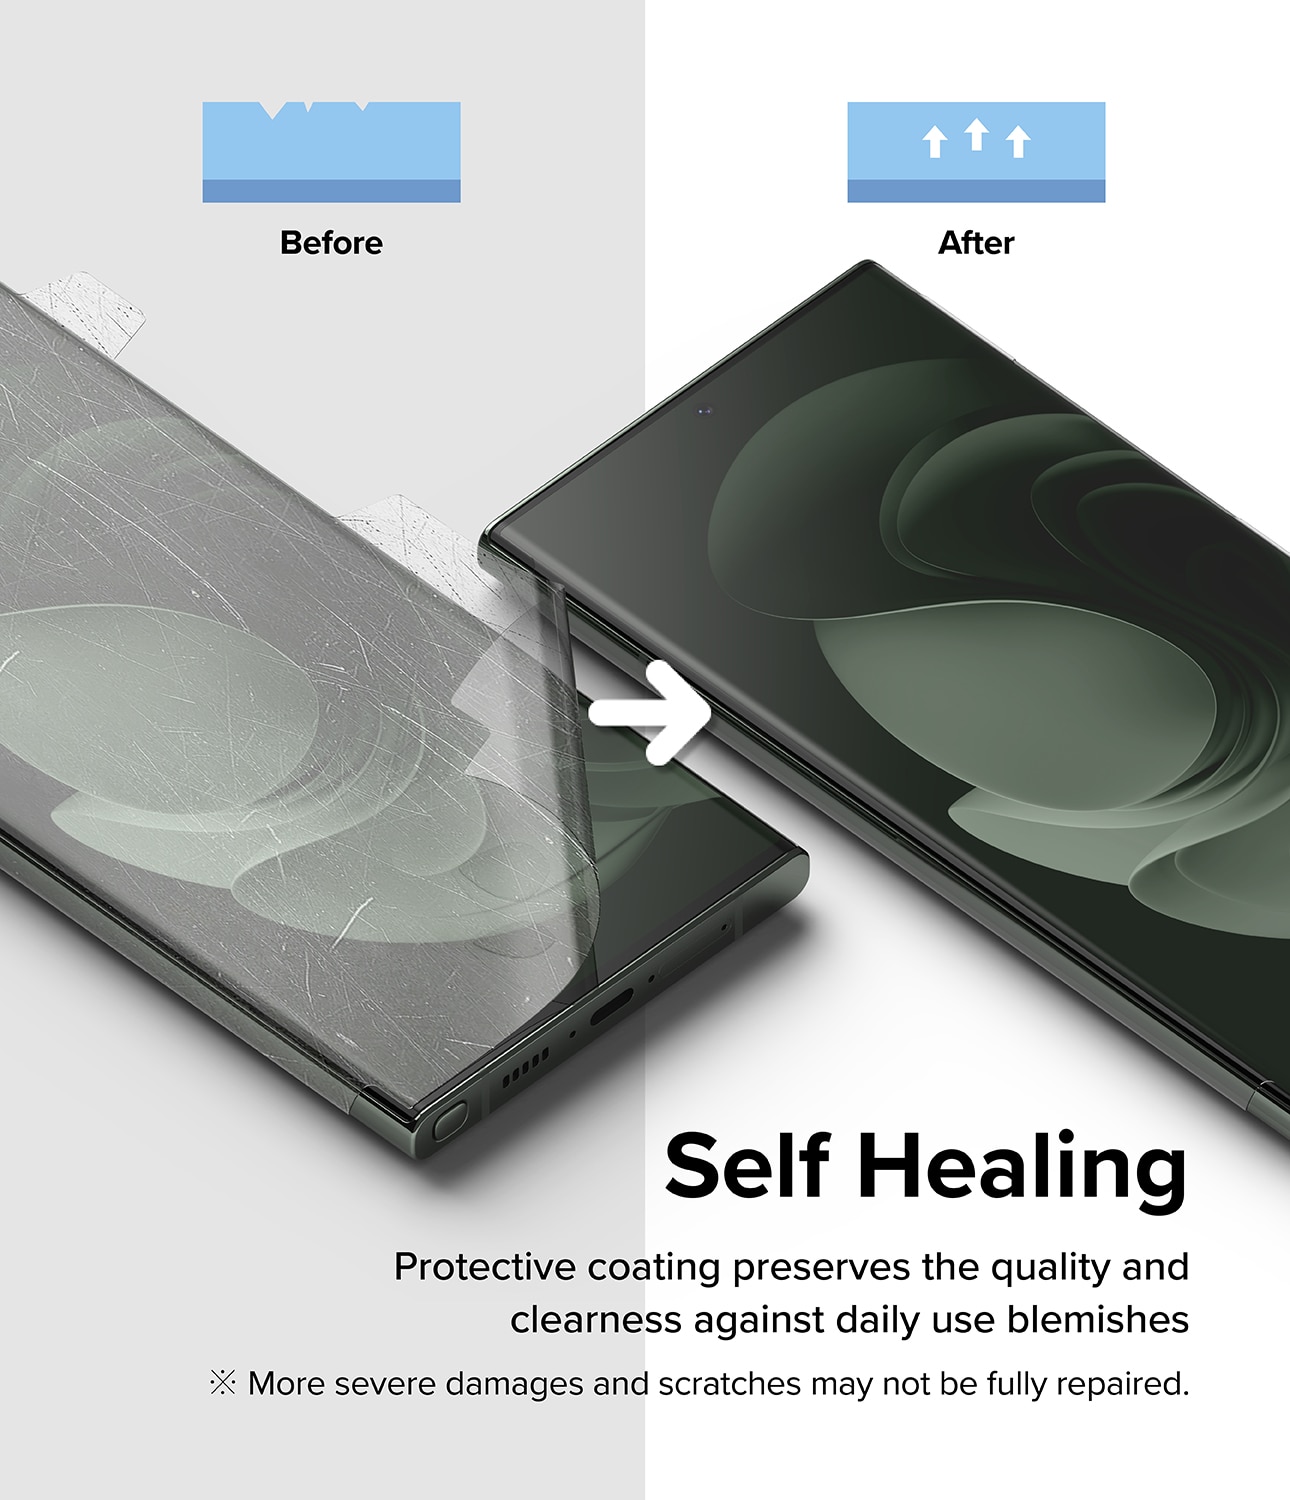 Dual Easy Wing Screen Protector (2-pack) Samsung Galaxy S23 Ultra